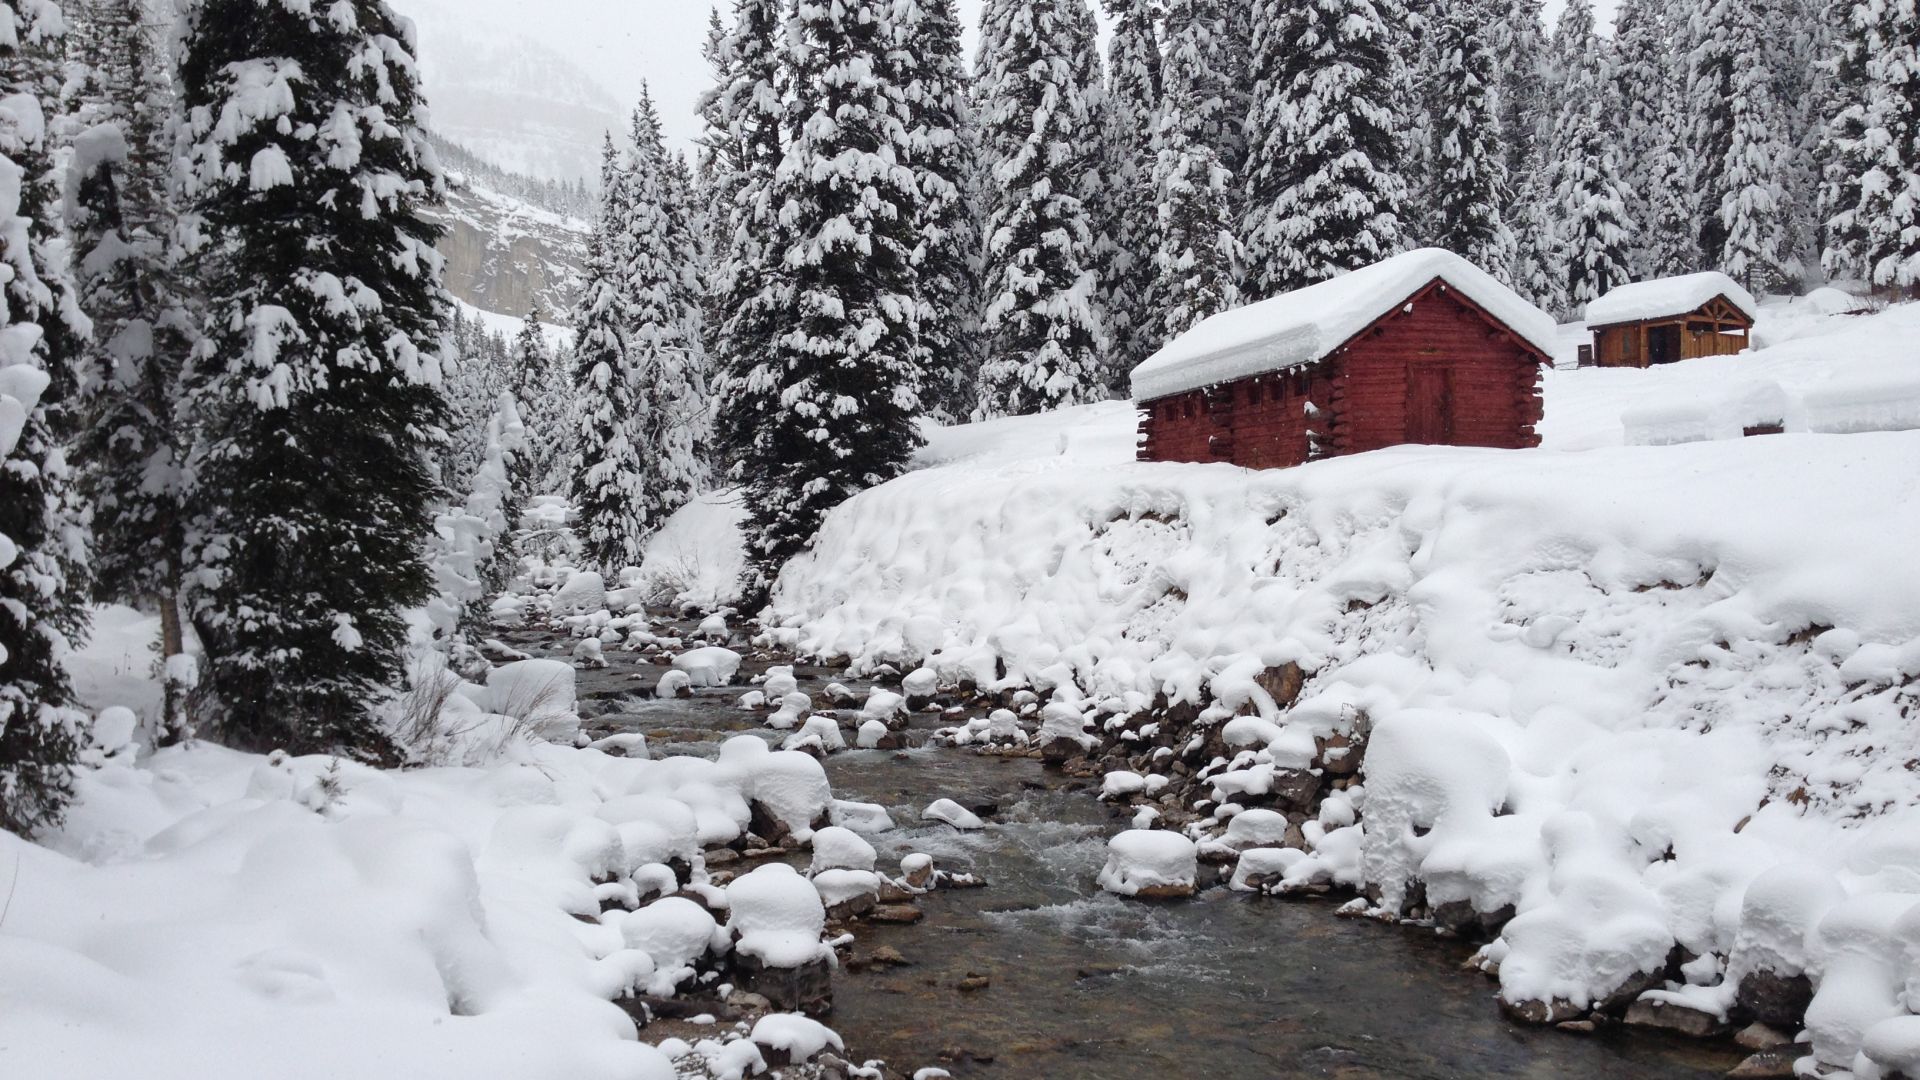 Jackson Hole winter scene with mountain stream, snow covered pine tress and wooden buildings with snow covered roofs